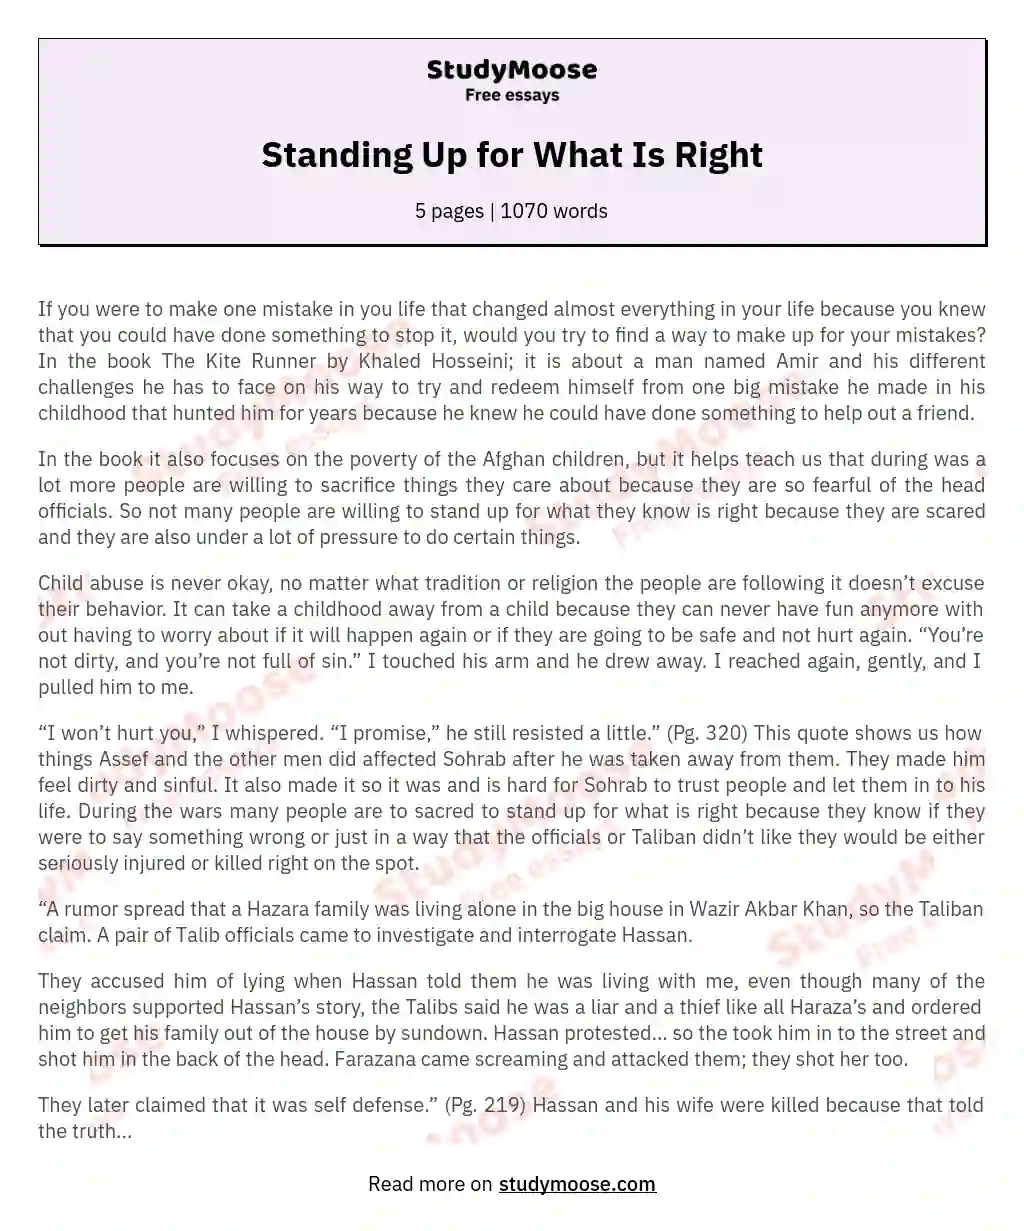 Standing Up for What Is Right essay